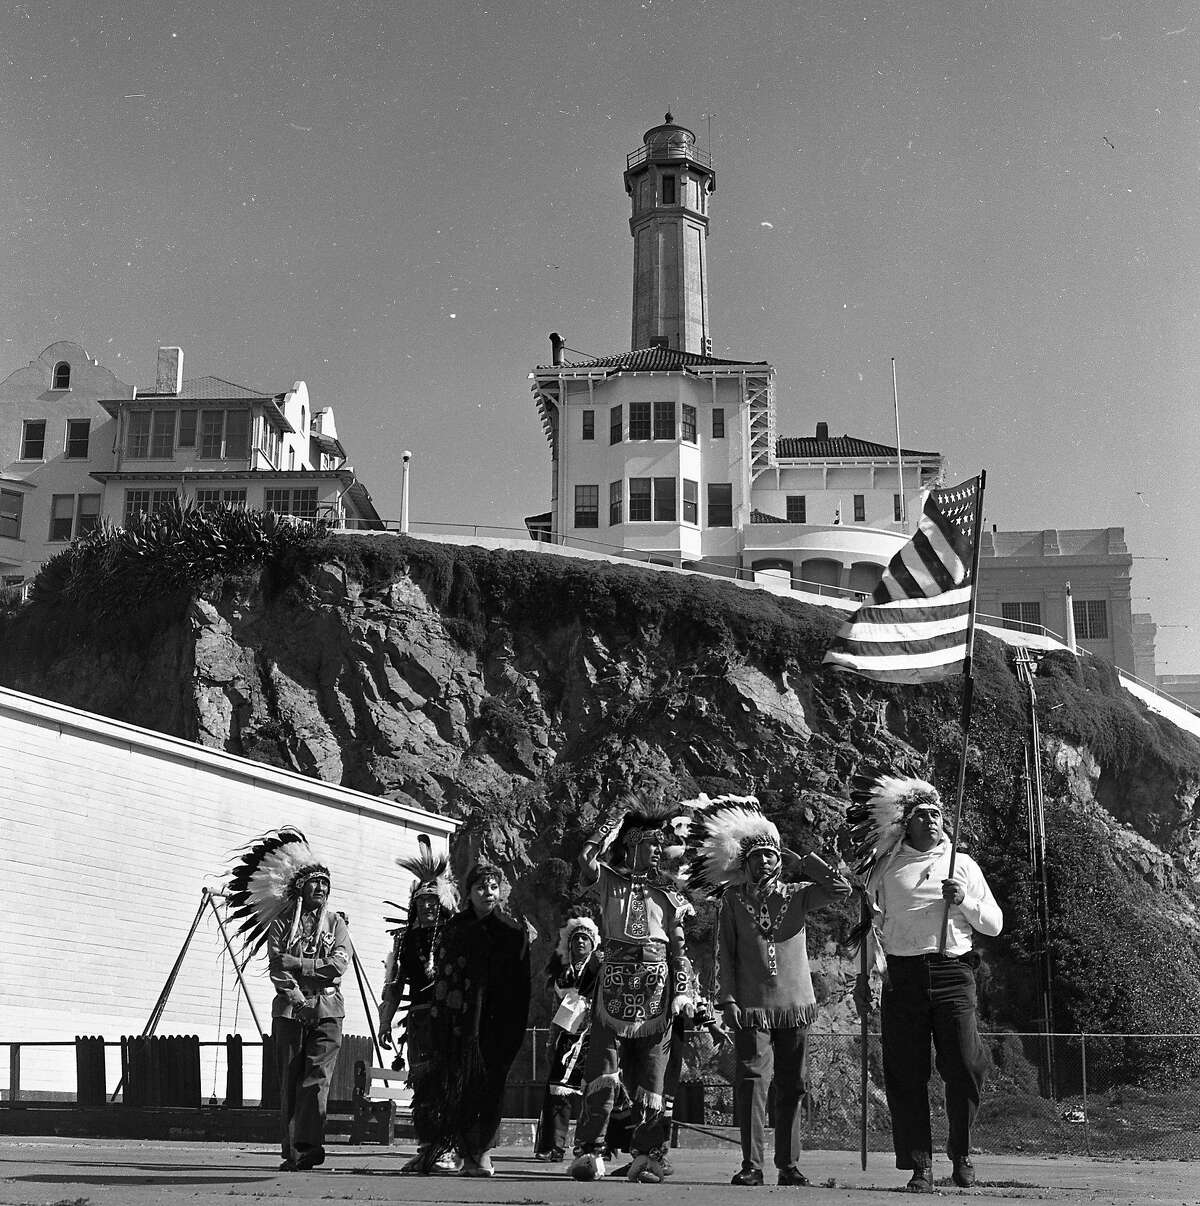 Sioux Indians arrive at Alcatraz island and stakes claim the property, March 8, 1964